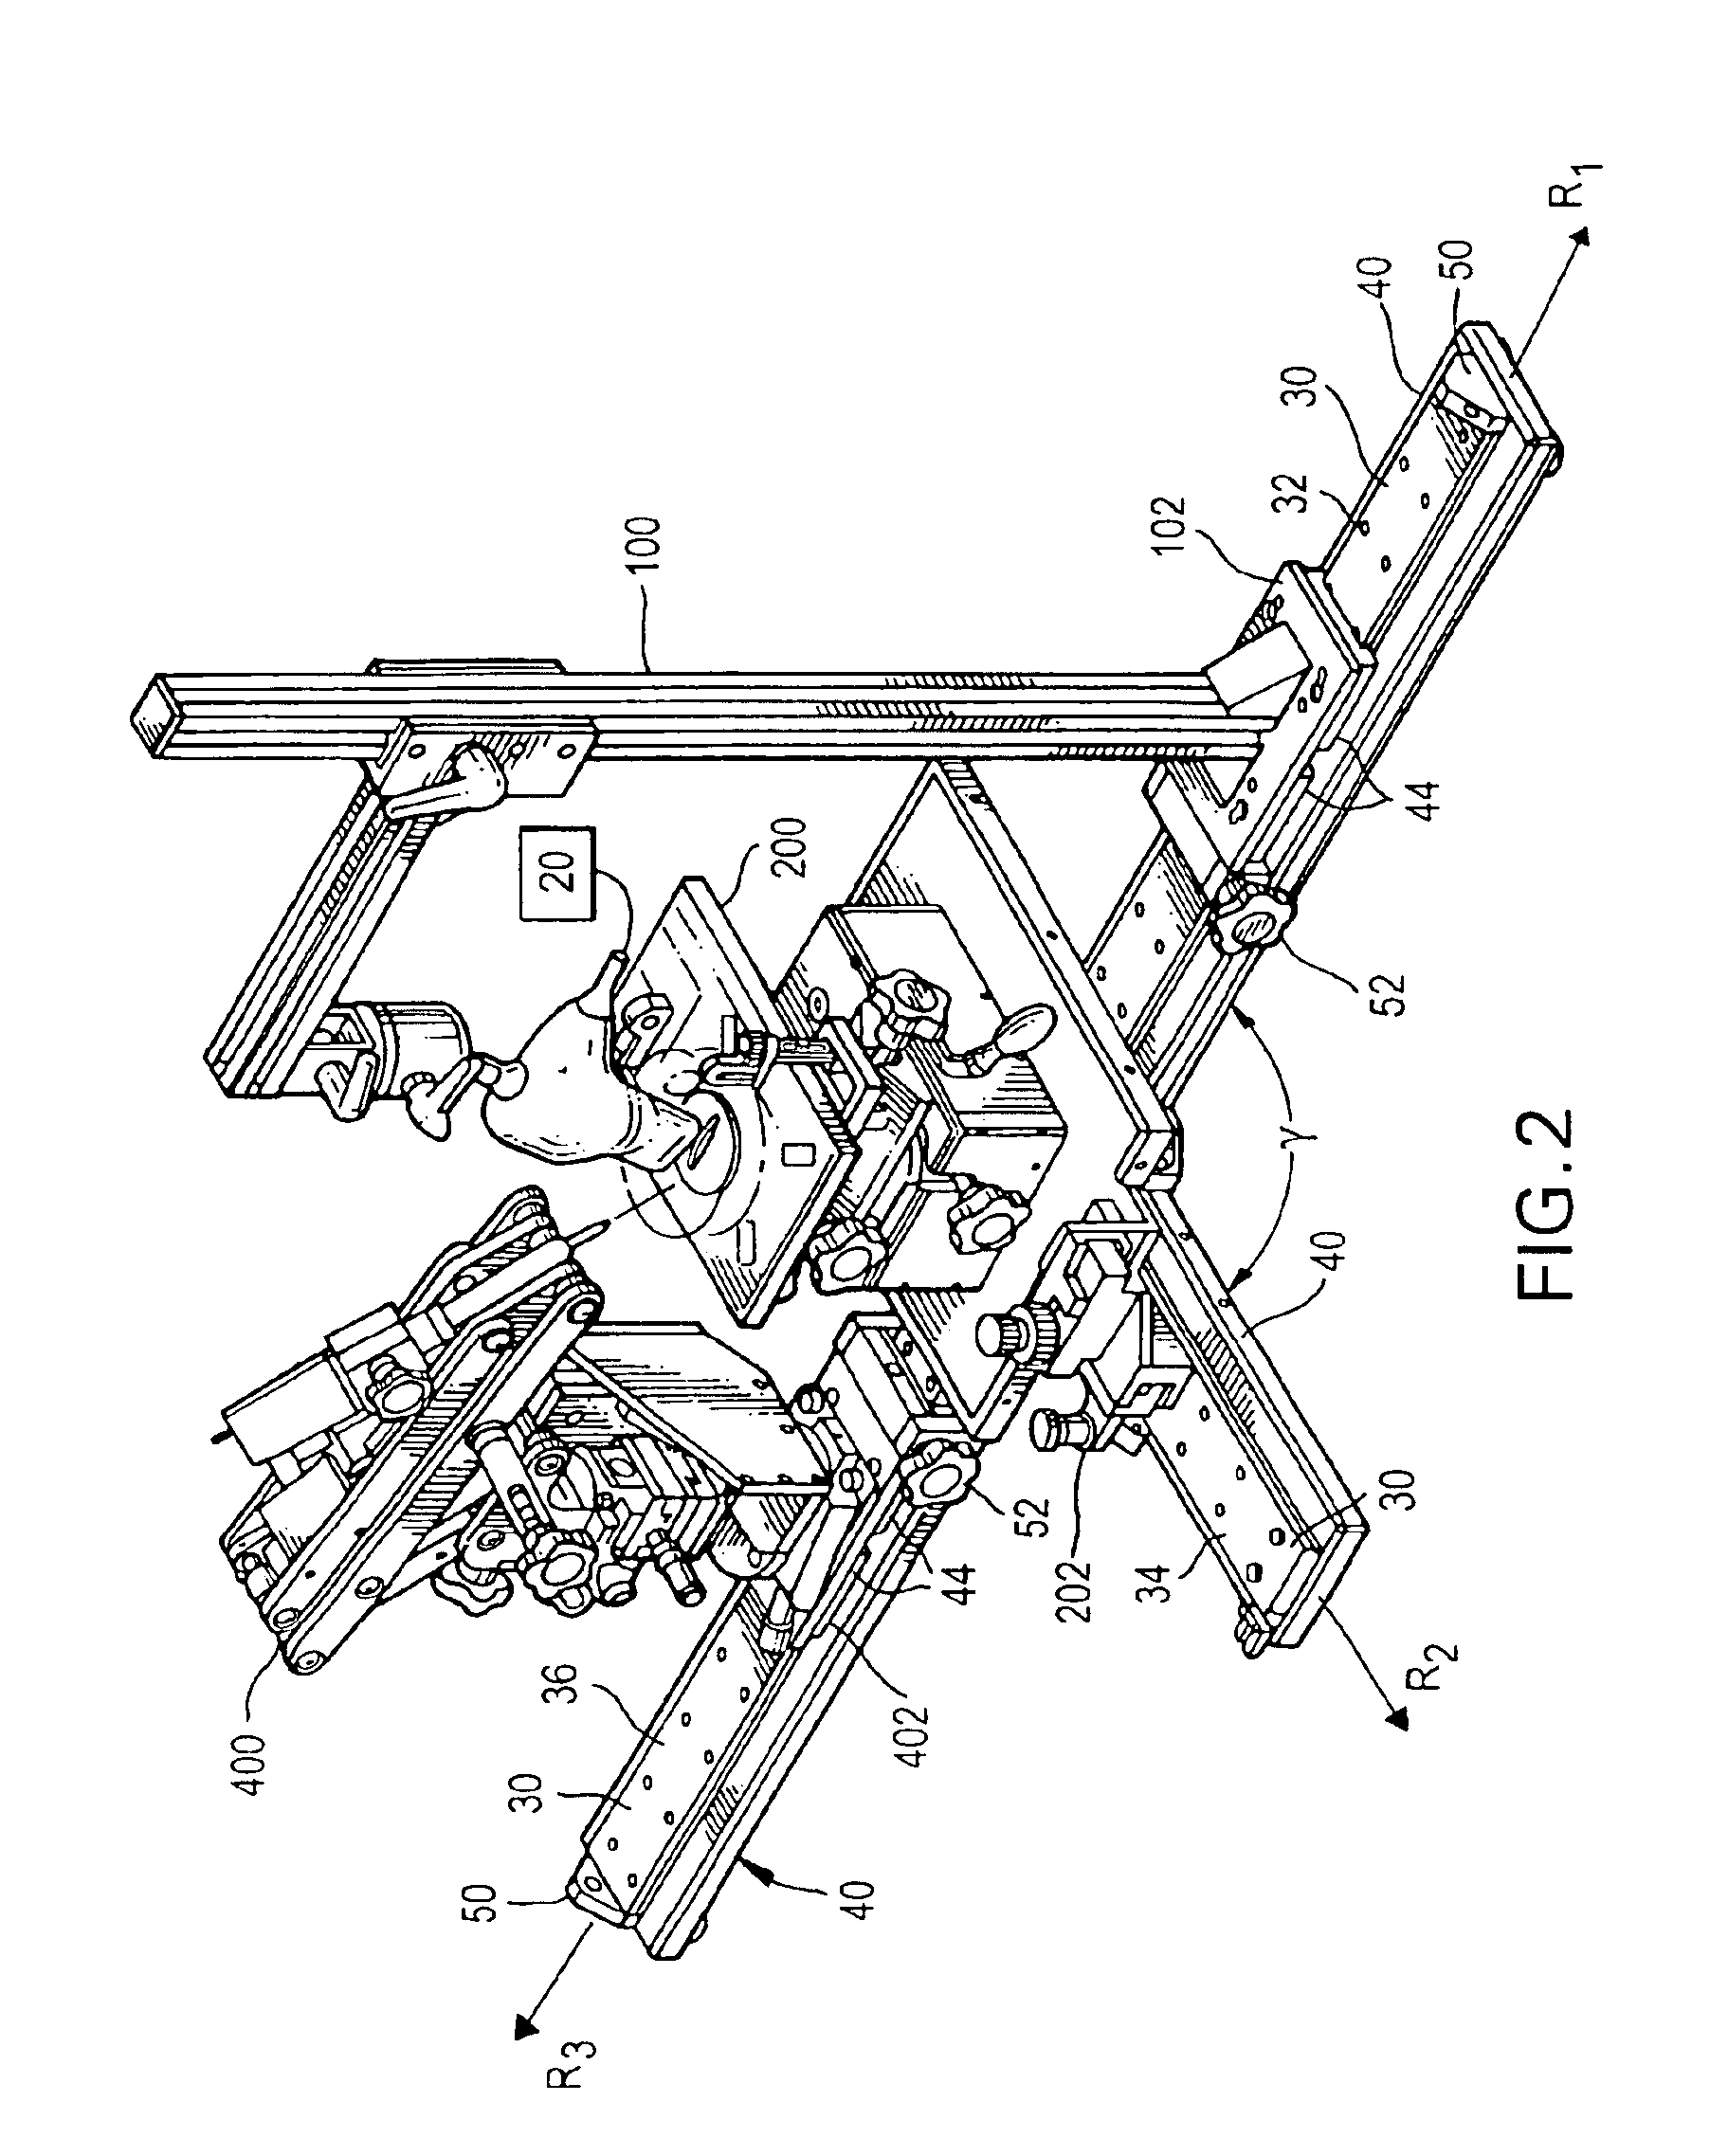 Small-animal mount assembly